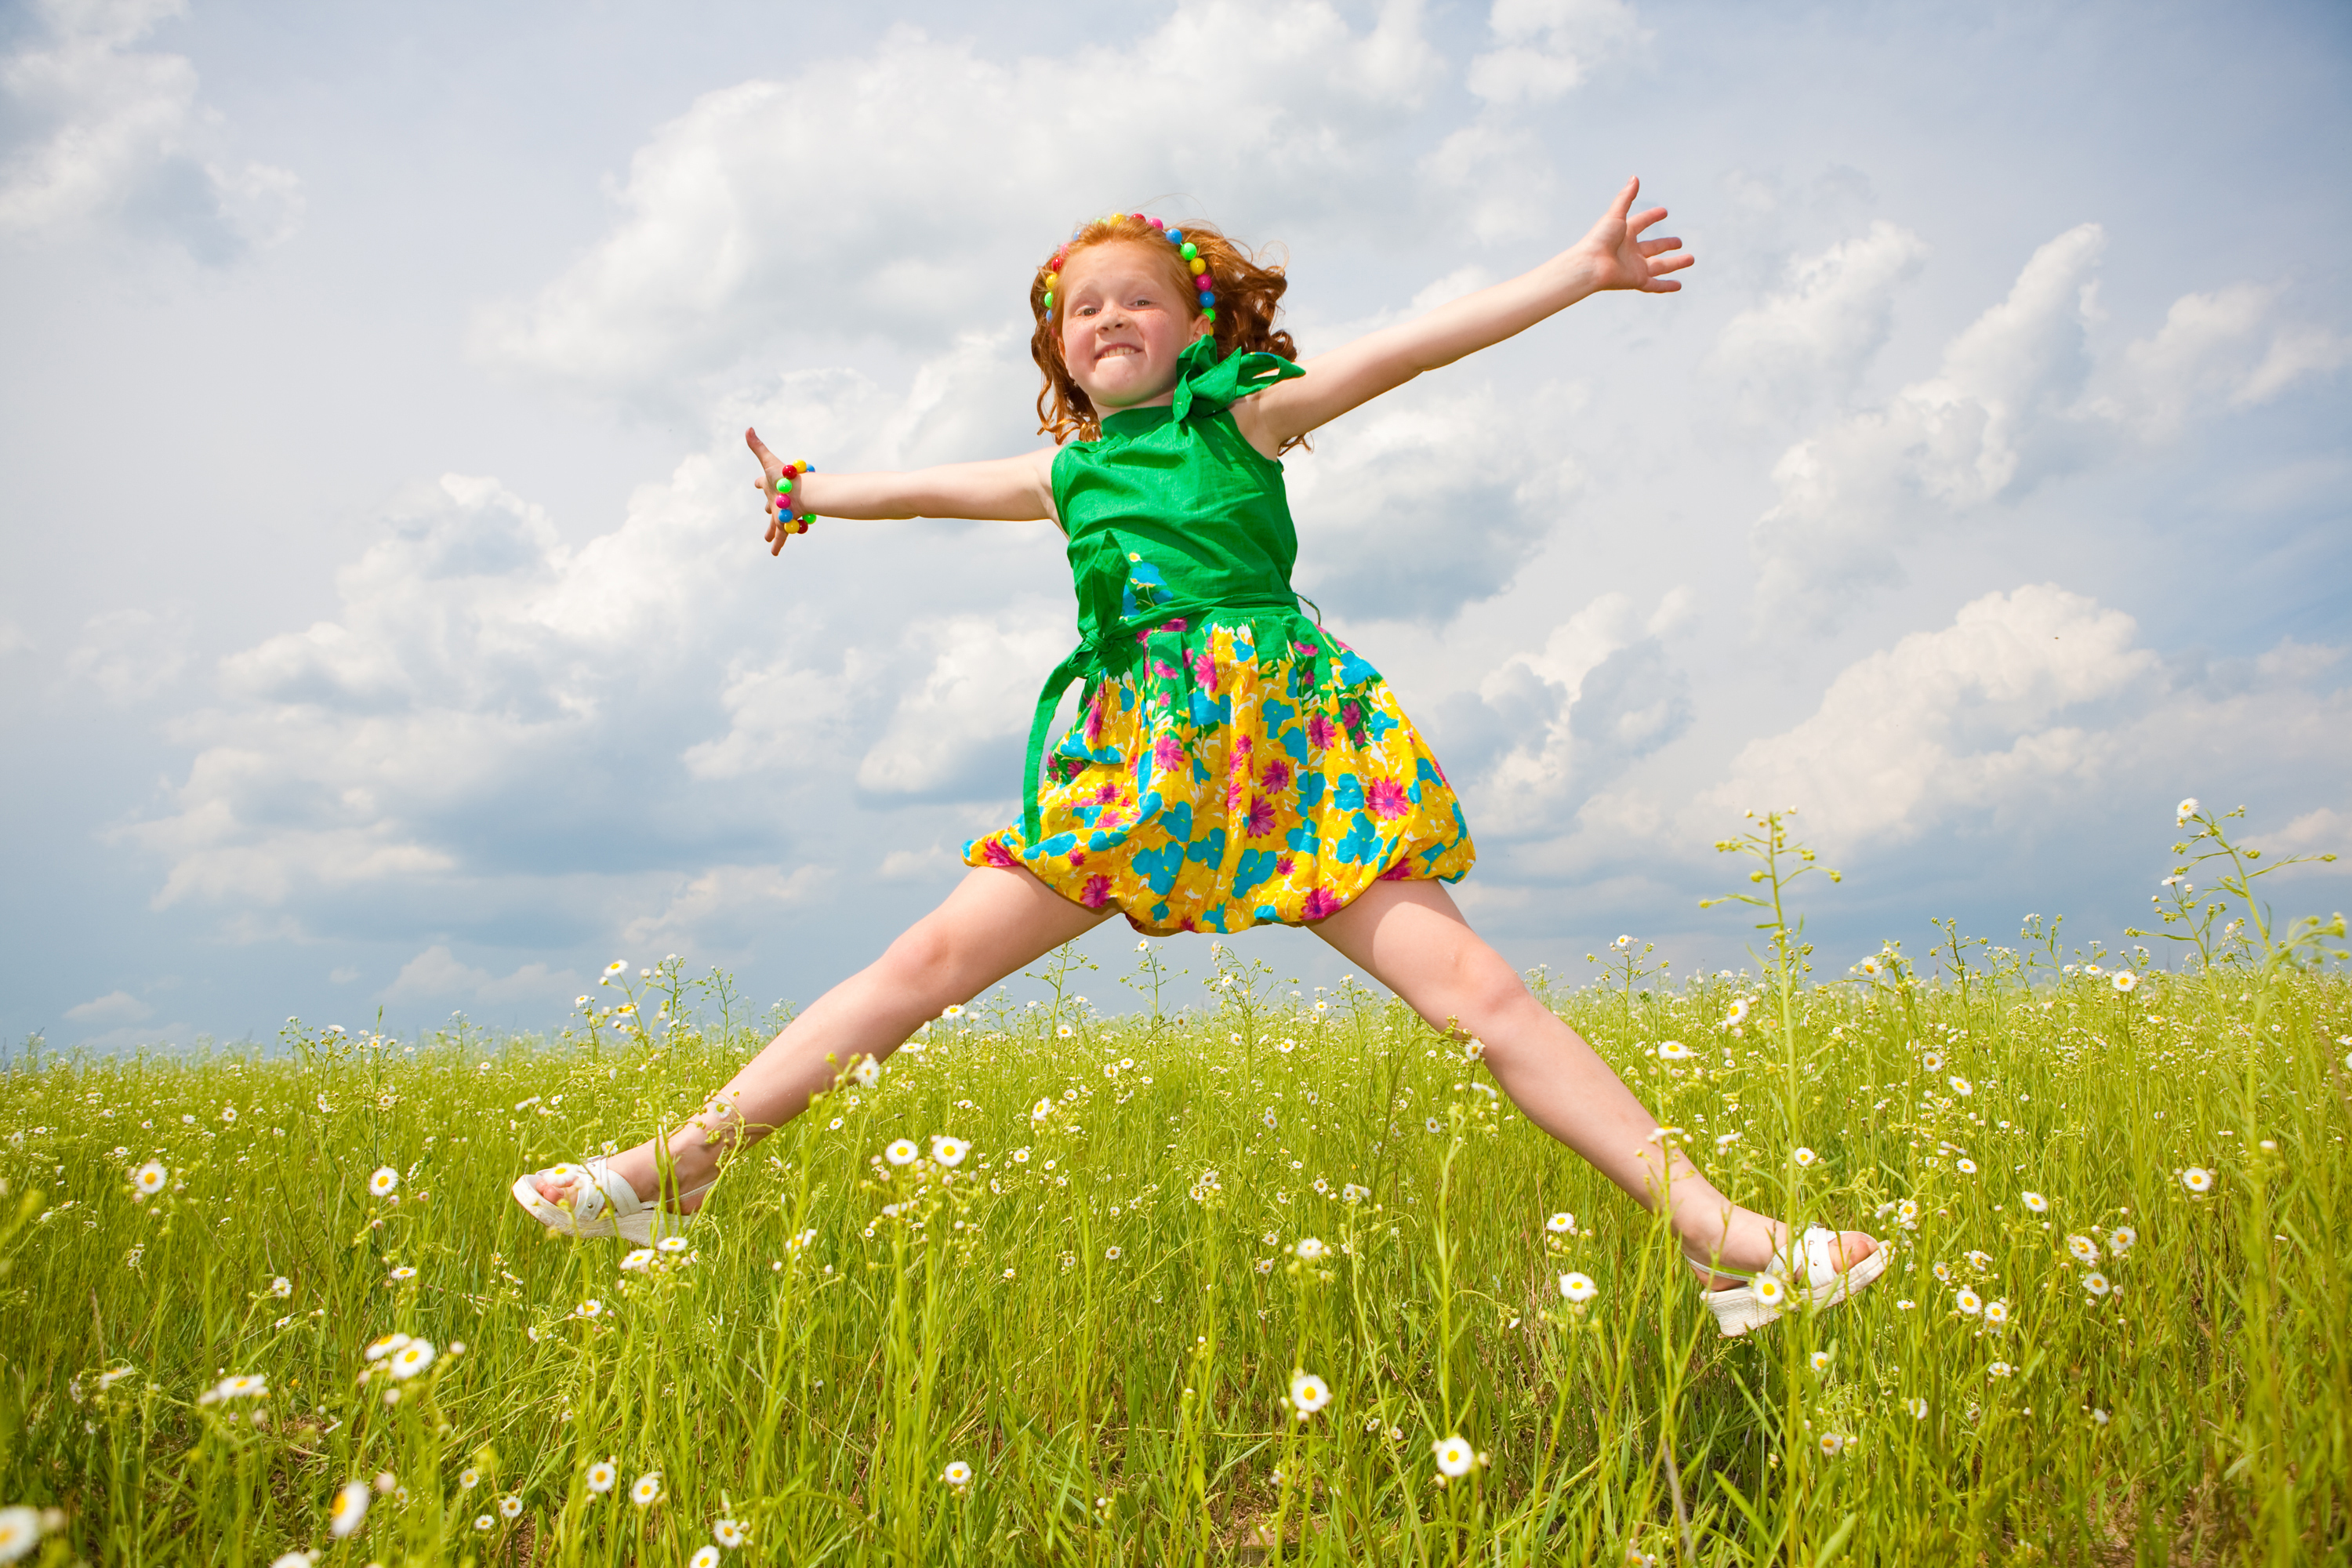 Little girl jumping against beautiful sky